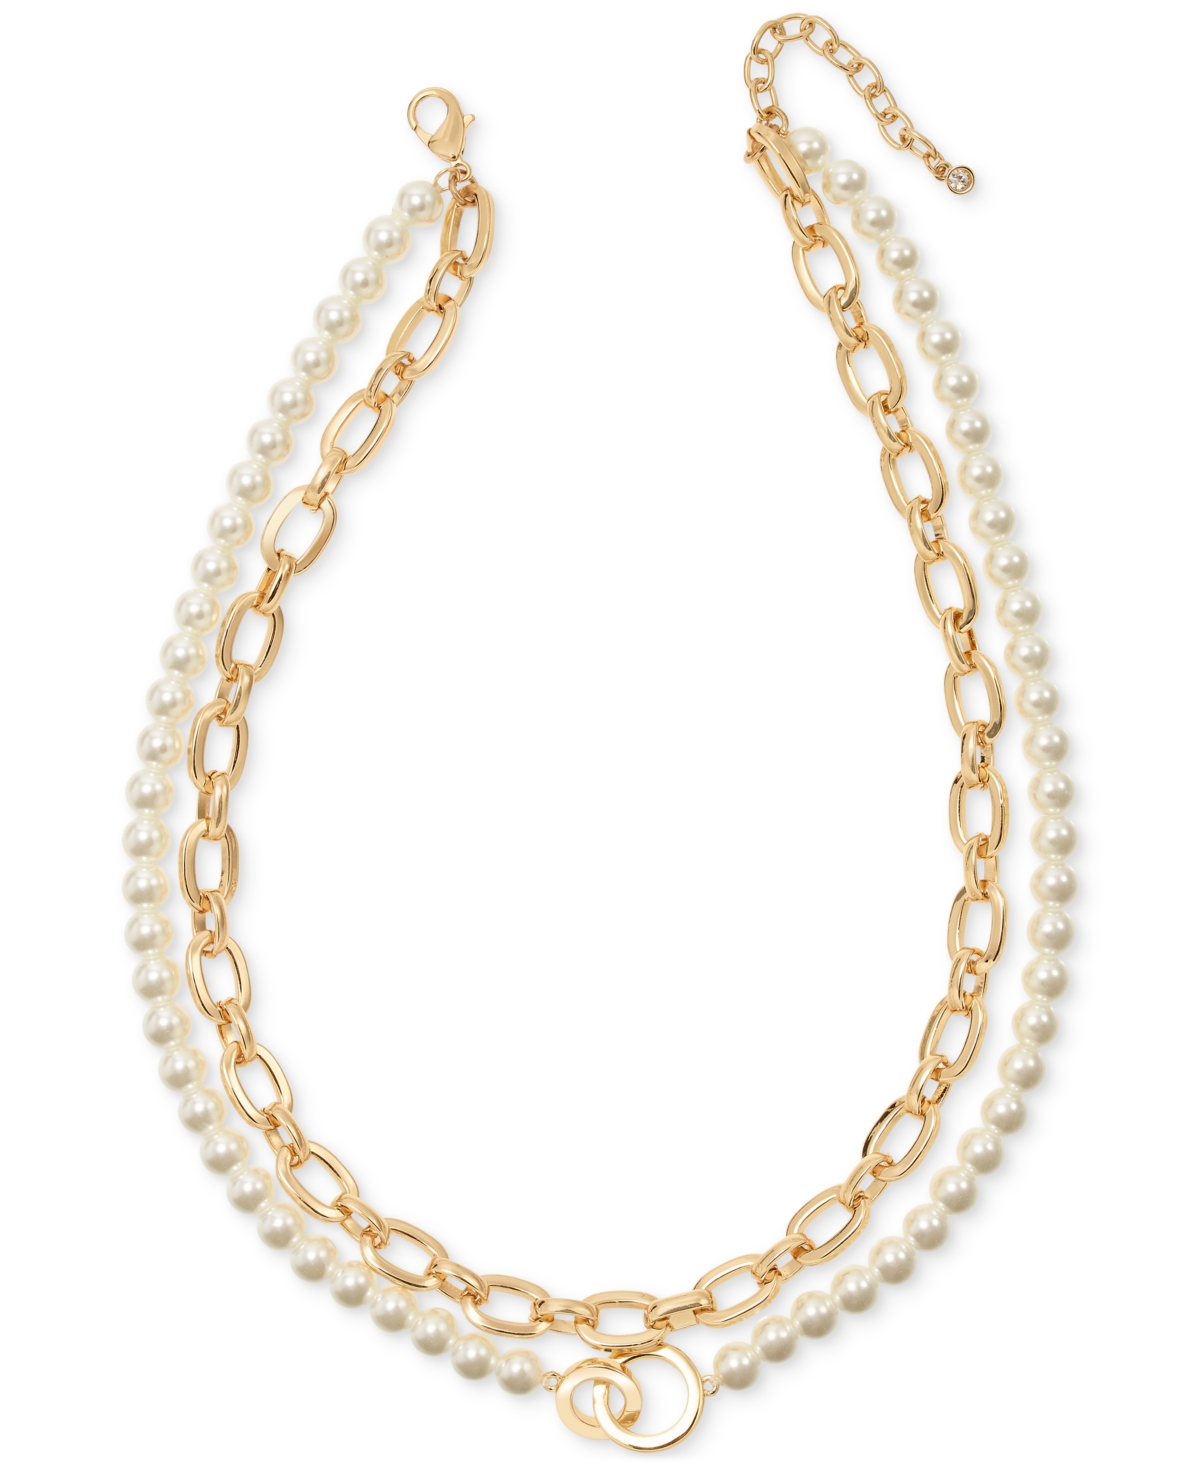 On 34th Gold-tone Imitation Pearl Two Row Necklace, 18-1/2" + 2" Extender, Created For Macy's